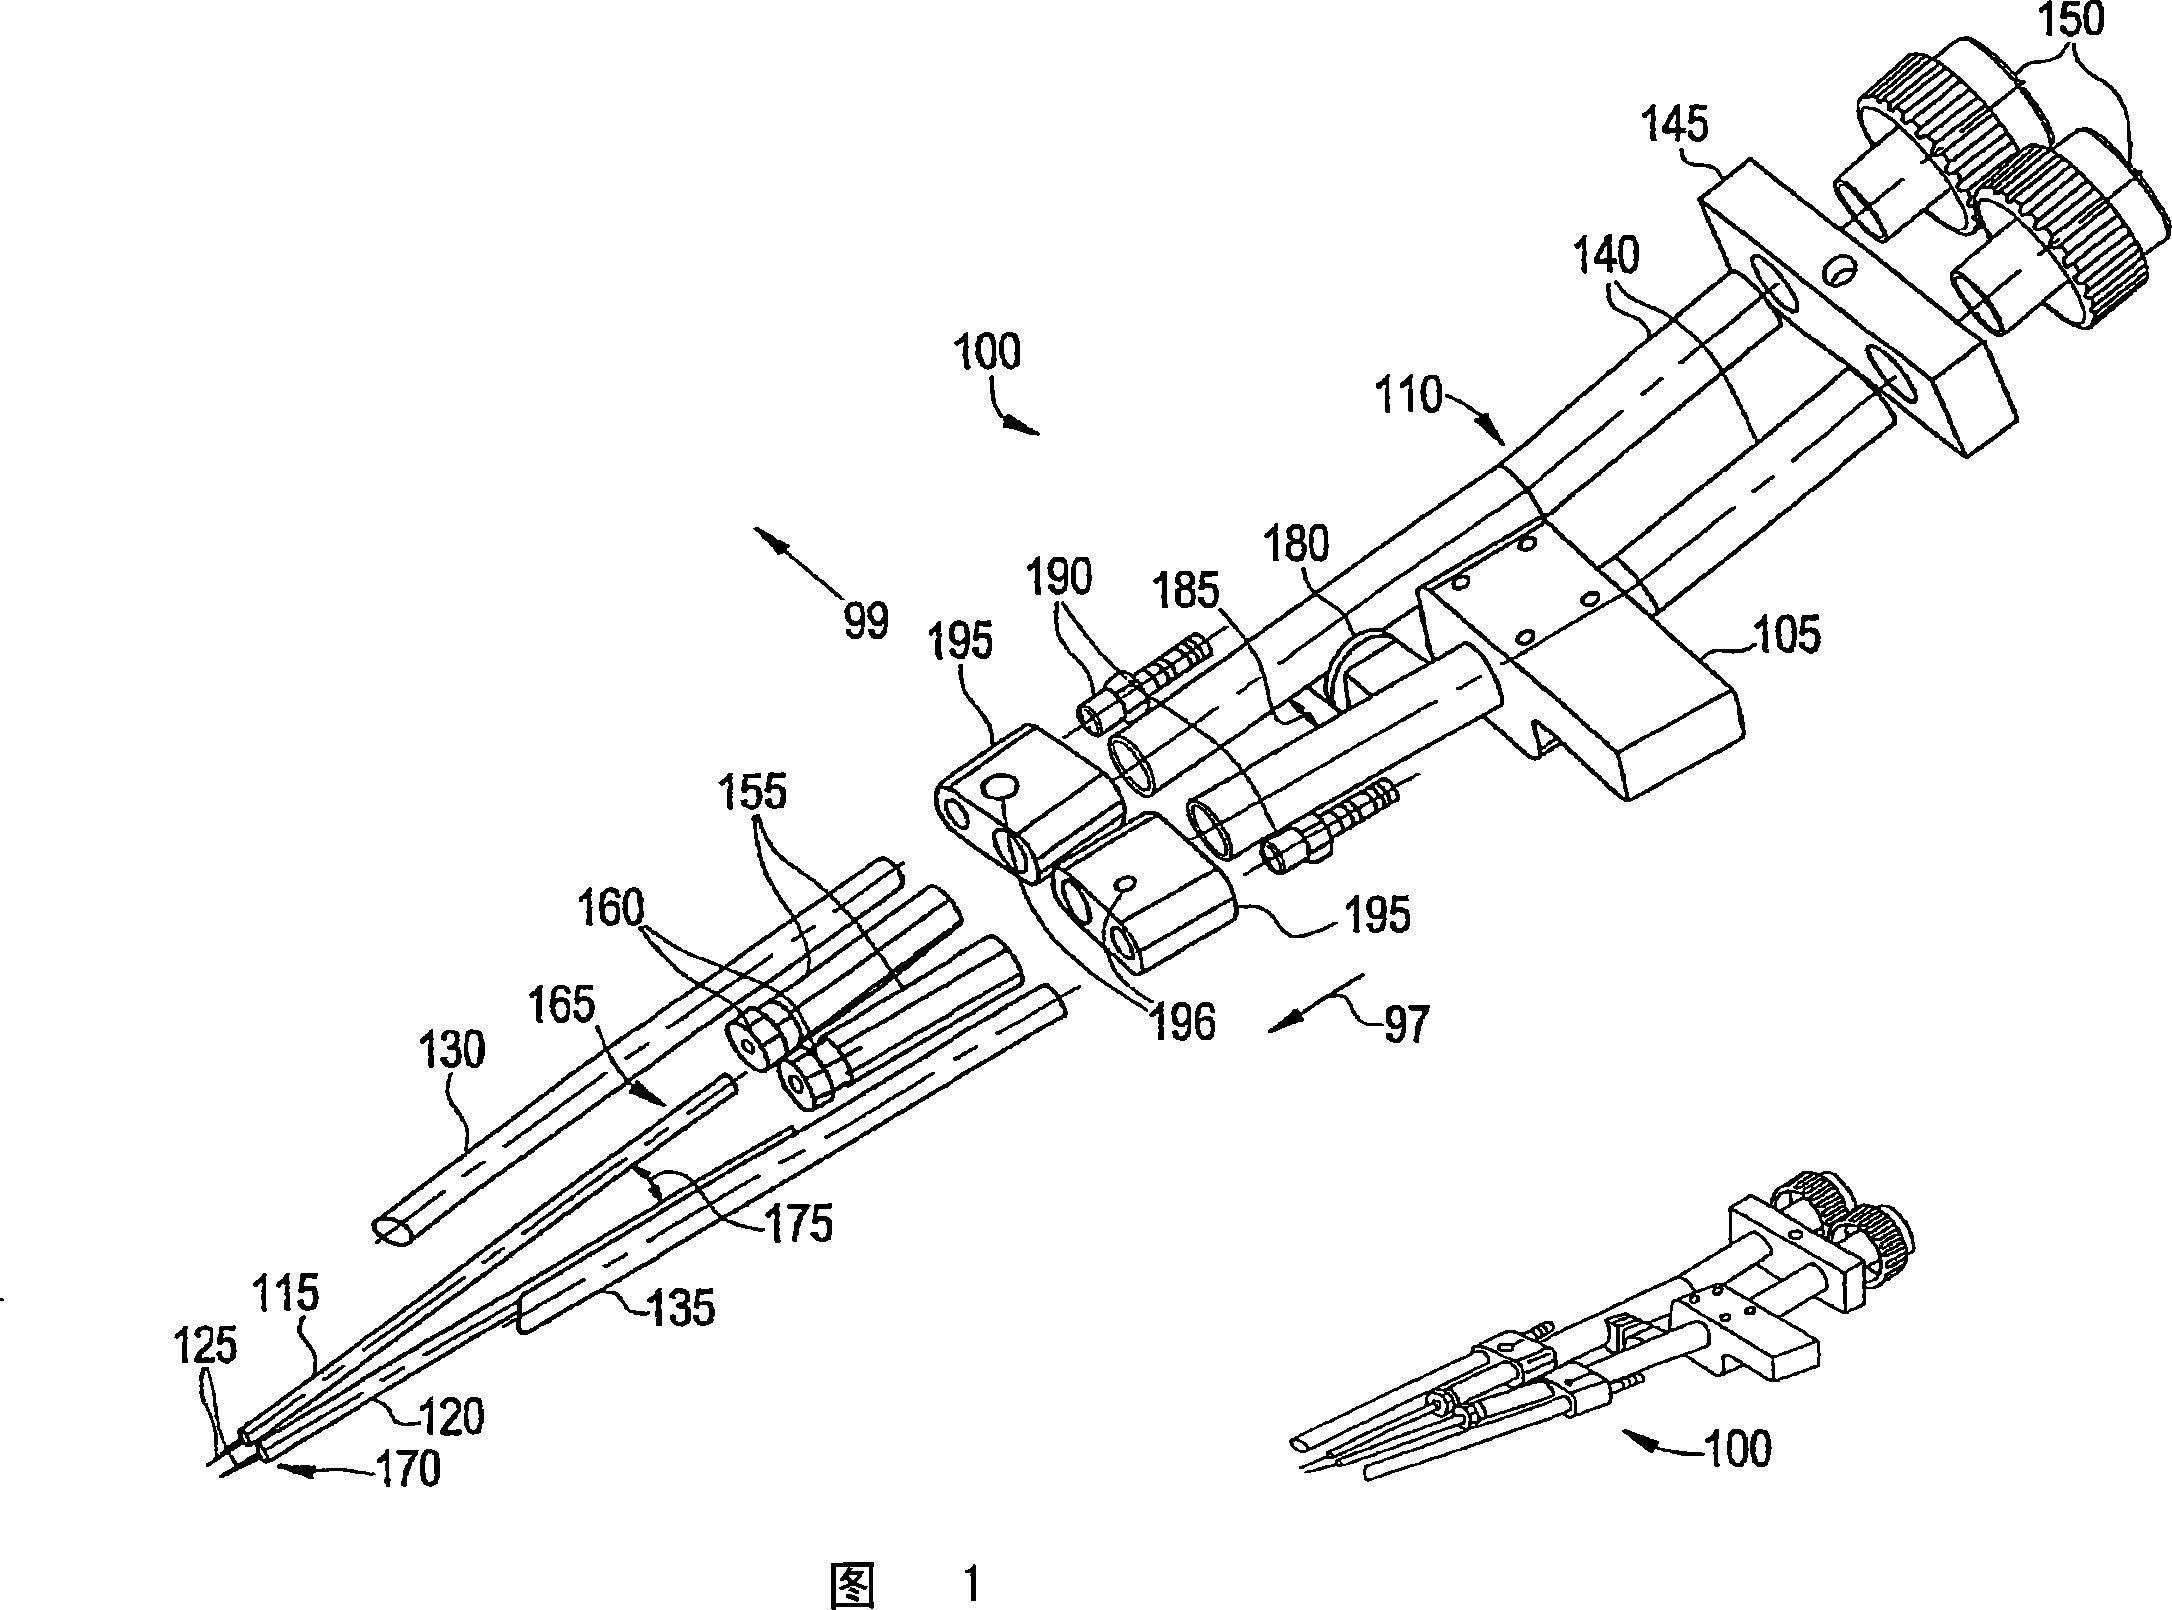 Apparatus for and method of deep groove welding for increasing welding speed